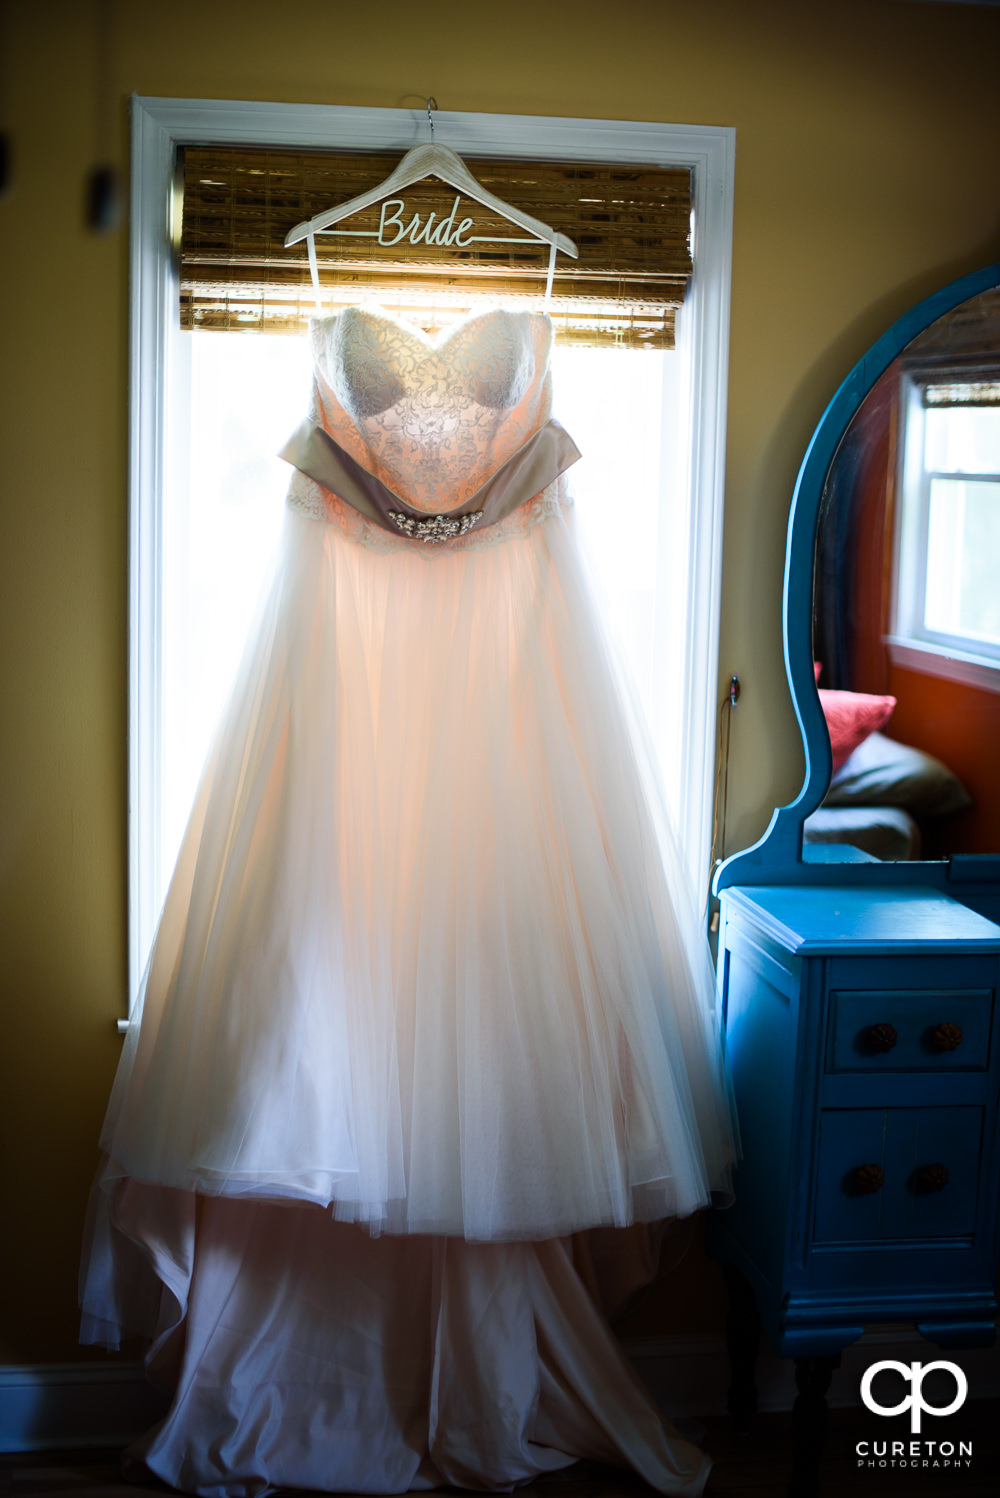 The brides dress hanging in a window.